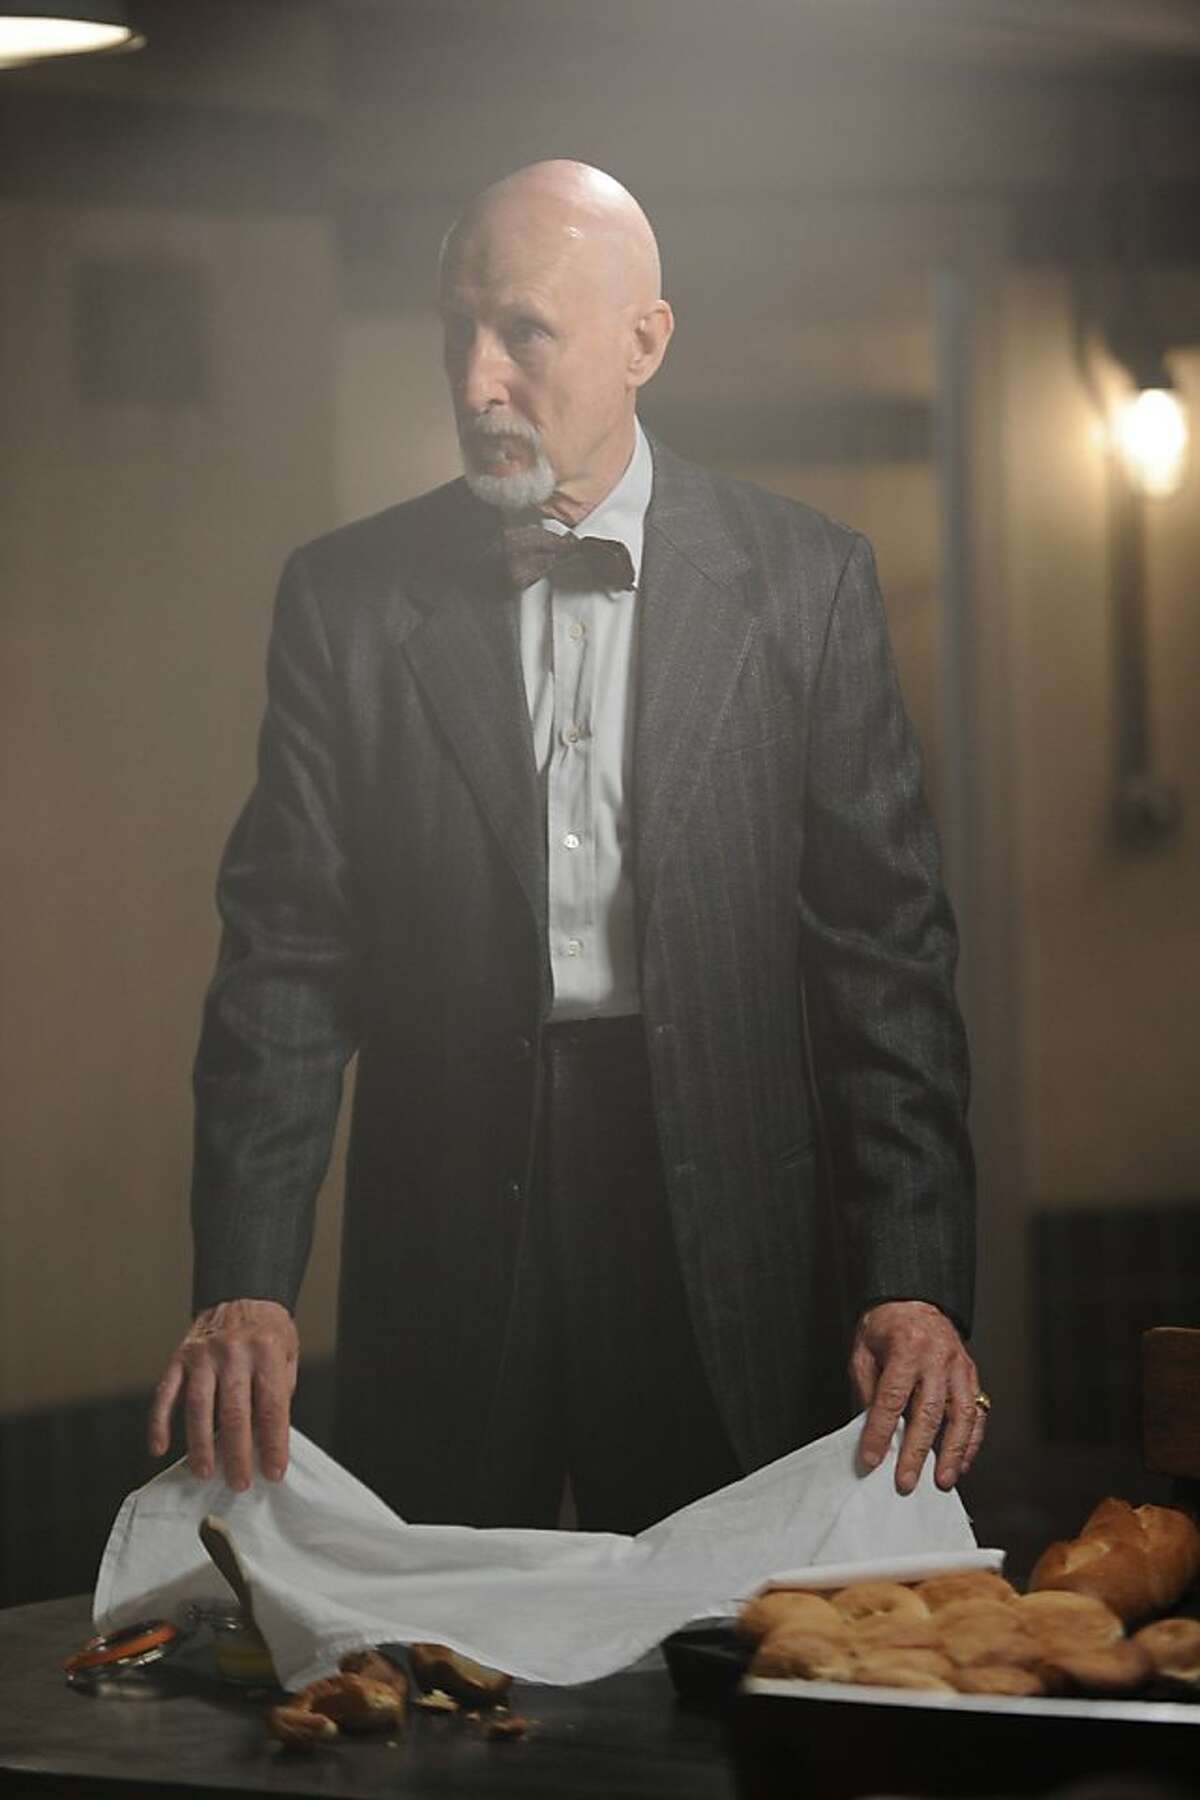 AMERICAN HORROR STORY Tricks and Treats -- Episode 202, Wednesday, October 24, 10:00 pm e/p) -- Pictured: James Cromwell as Dr. Arden -- CR: Michael Becker/FX